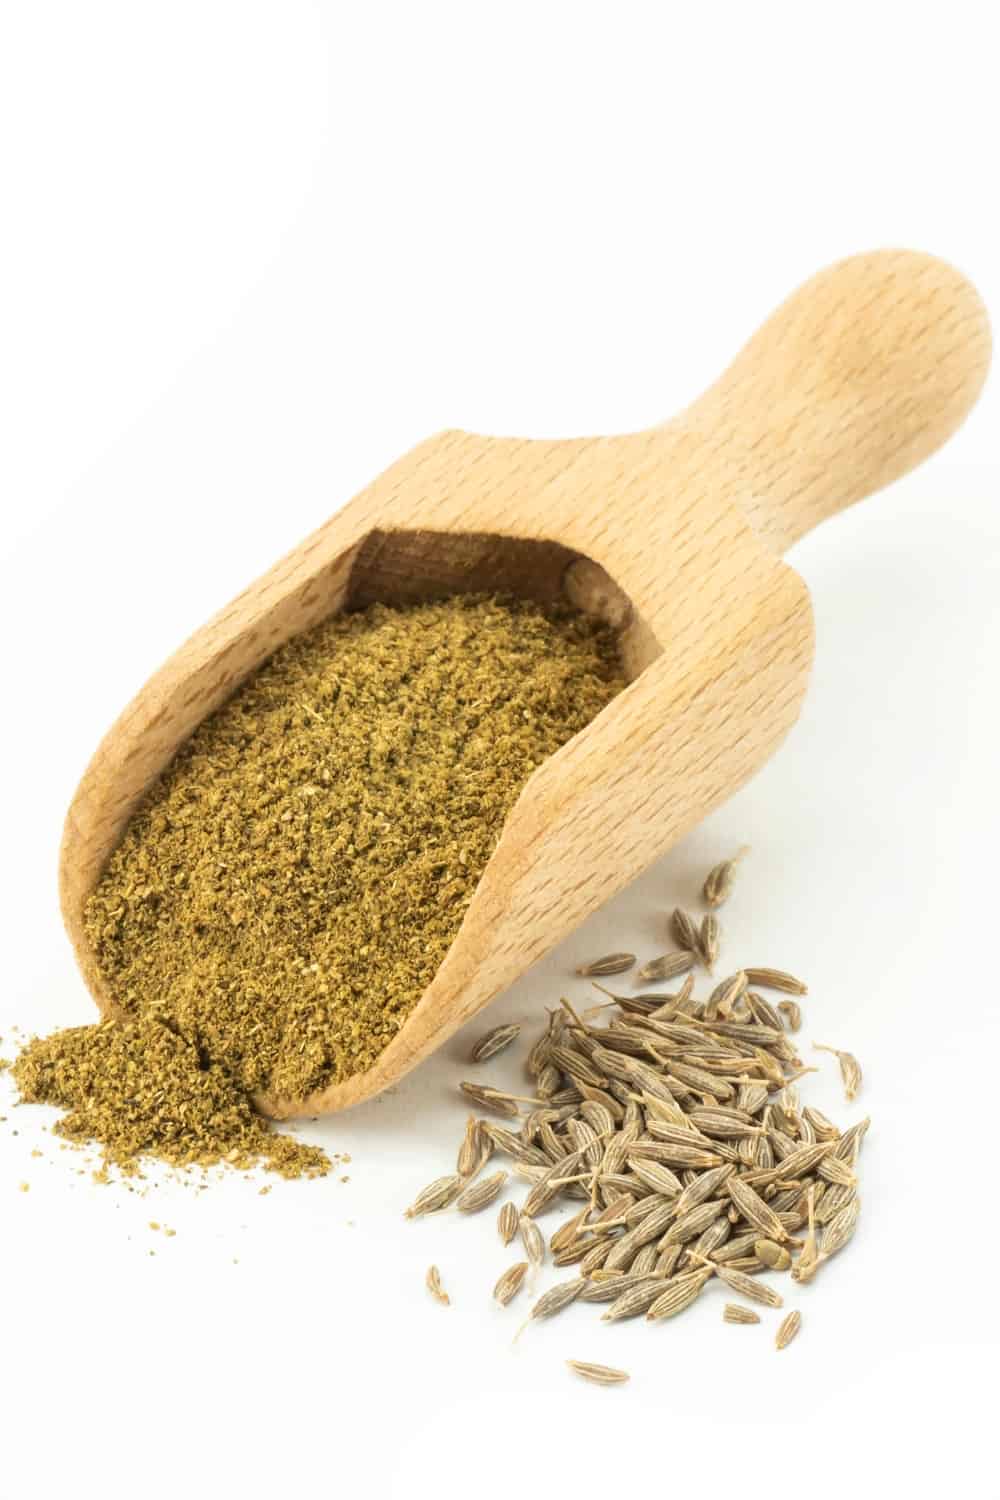 Dry cumin seeds with ground caraway